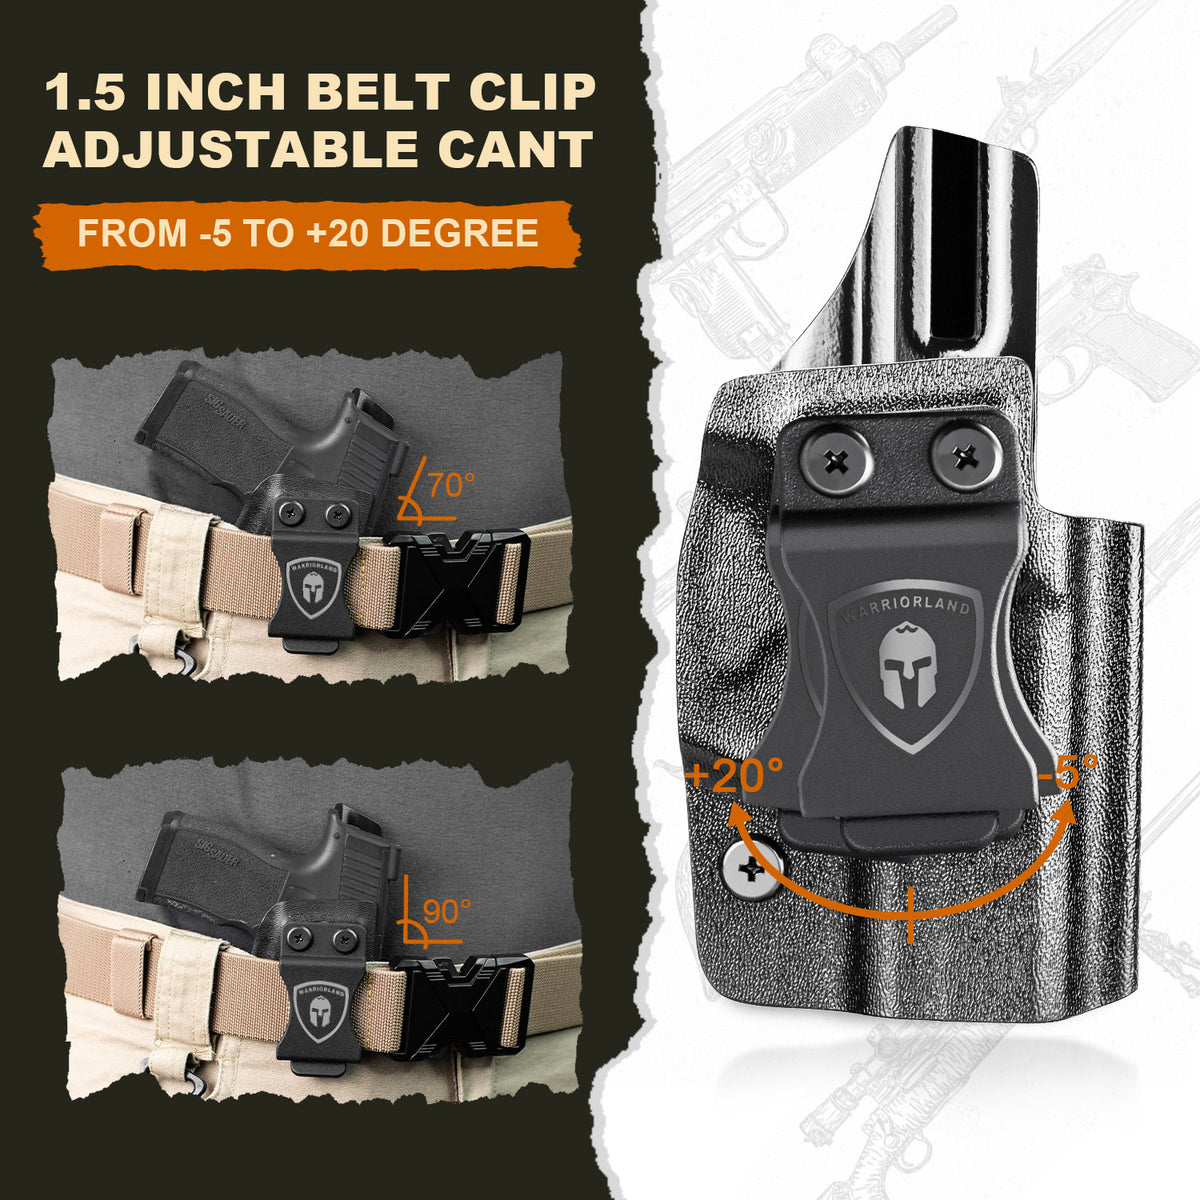 Ruger MAX-9 Holster IWB Kydex Holster Optics Cut: Ruger Max 9 Pistol, Inside Waistband Appendix Carry MAX 9mm Holster, Adj. Retention & Cant, Right/Left Hand Optional|WARRIORLAND